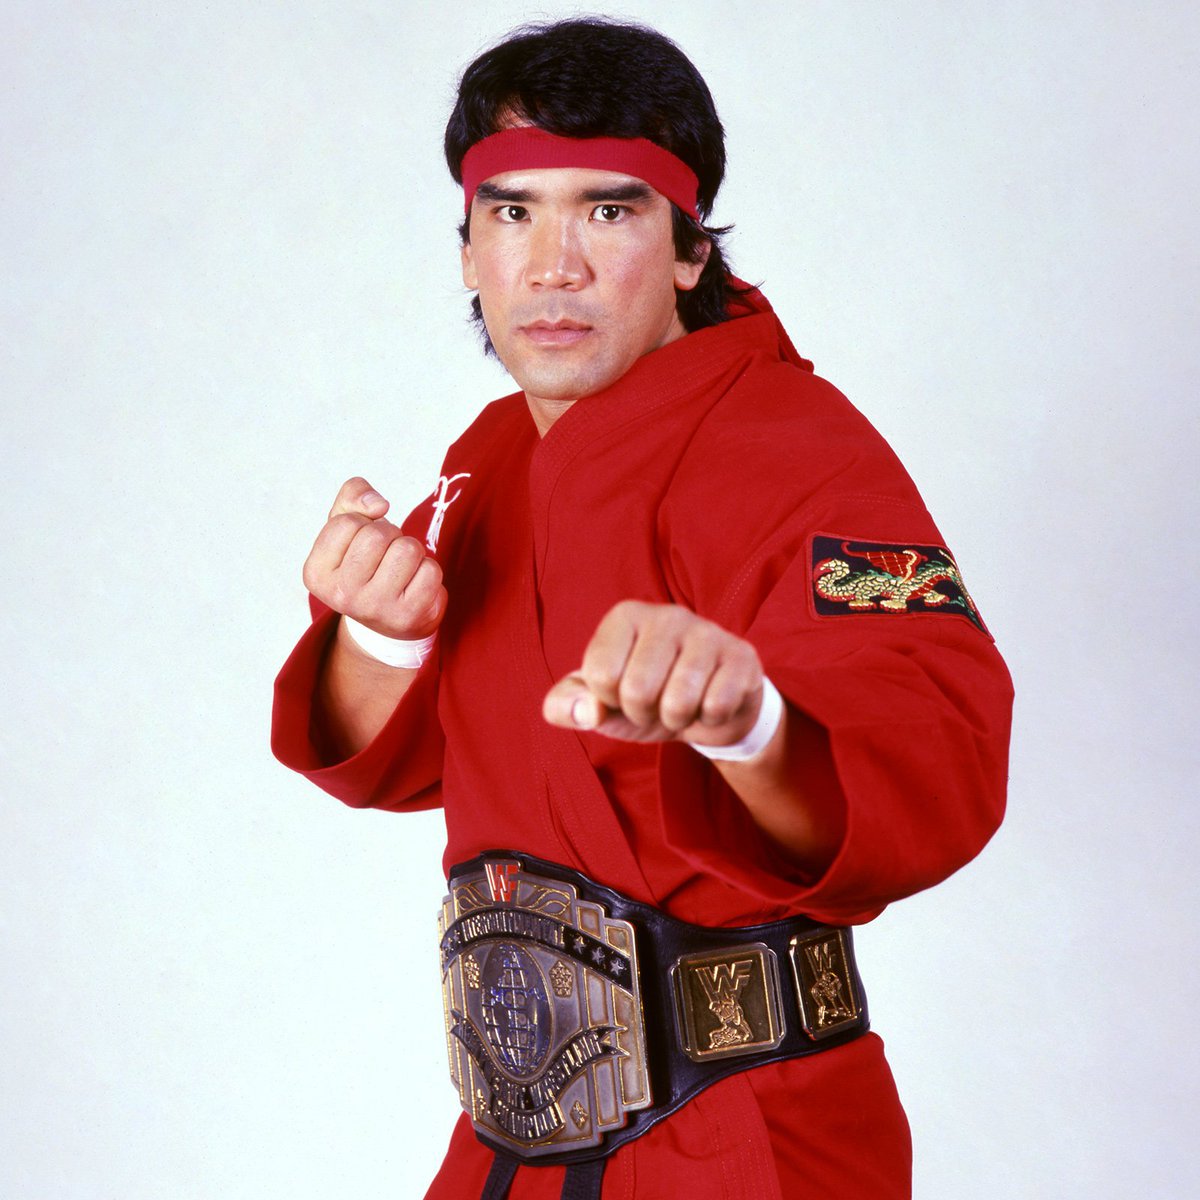 Intercontinental Champion of the day: Ricky Steamboat - Won the WWF Intercontinental title in a classic at WrestleMania III on March 29, 1987. His reign lasted 65 days. 🏆 #WWF #WWE #Wrestling #RickySteamboat